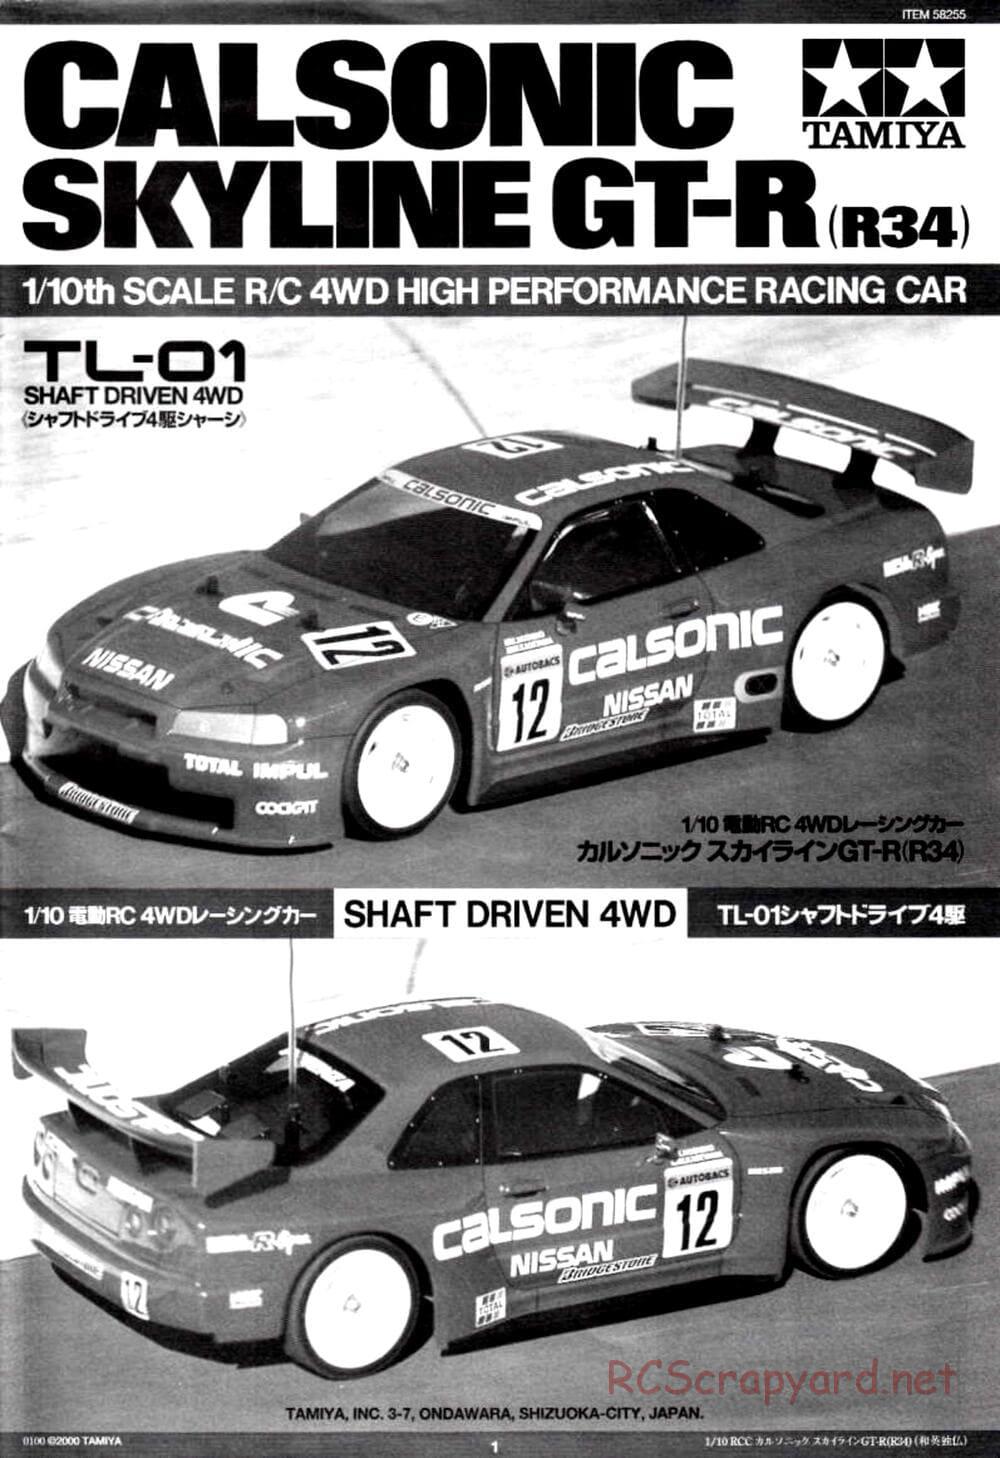 Tamiya - Calsonic Skyline GT-R (R34) - TL-01 Chassis - Manual - Page 1